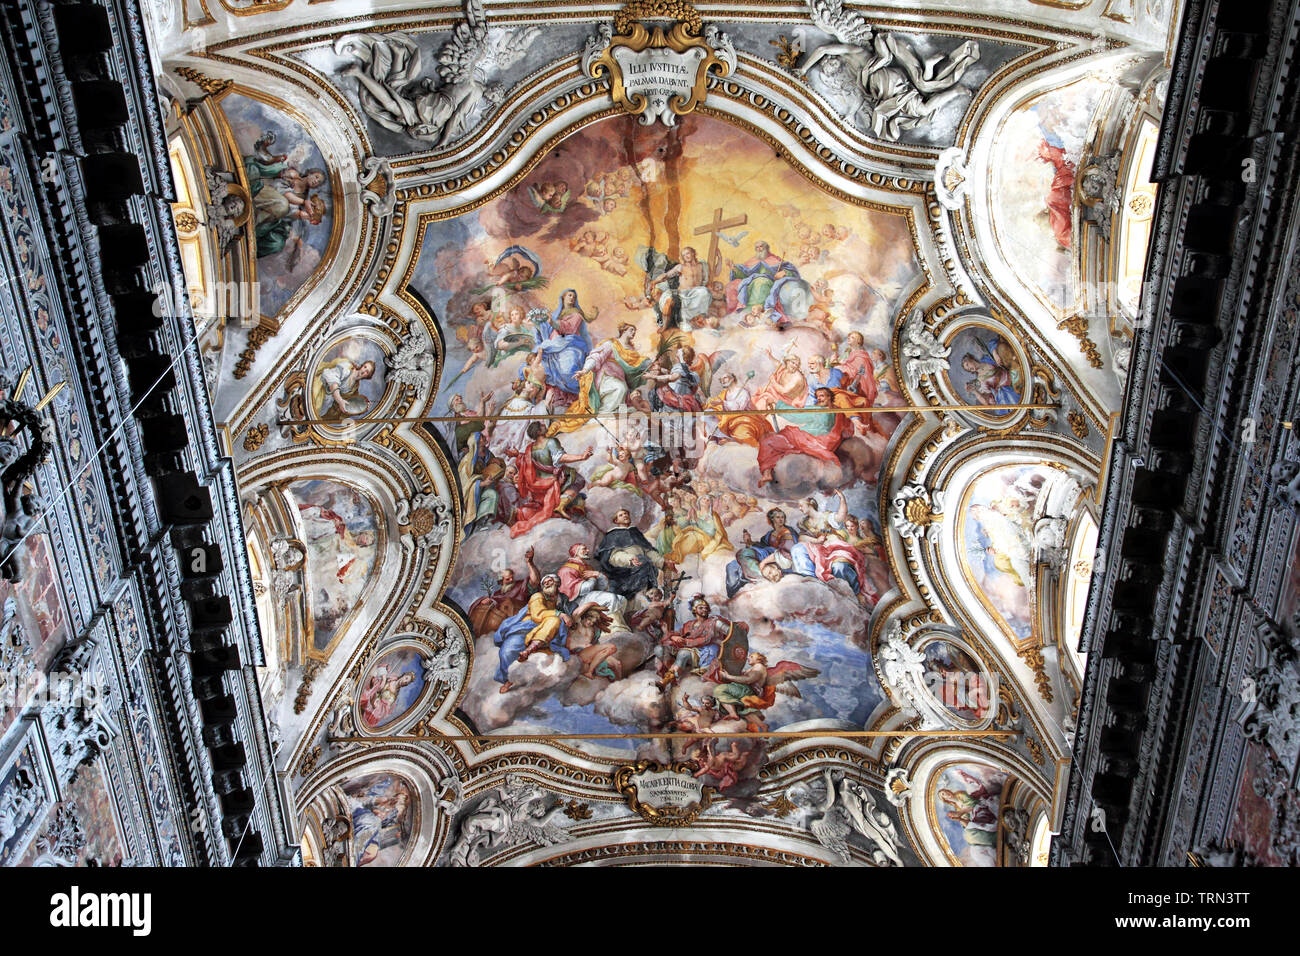 The ornate ceiling of Saint Catherine's Church Virgin and Martyr in Piazza Bellini in Palermo Sicily Stock Photo